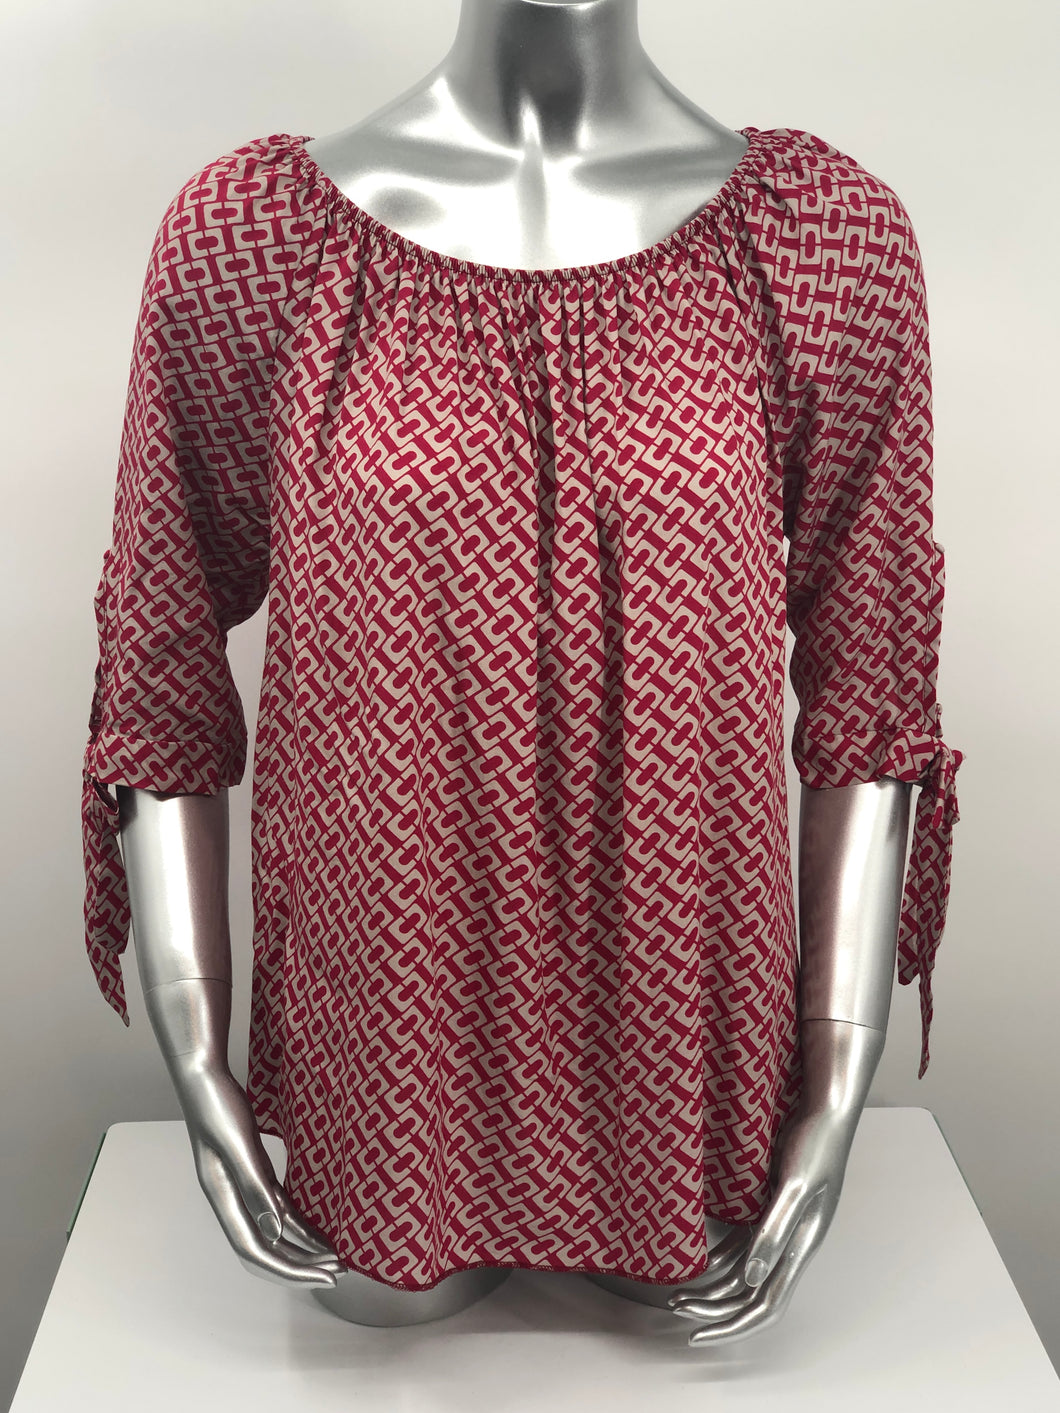 Our Rylee Raspberry Tie Sleeve Top is so versatile.  With a raspberry and tan color geometric pattern, you create so many different looks with this lovely top.  Pair with tan, white or black bottoms to create a dressier look or wear with jeans for a more casual look.  